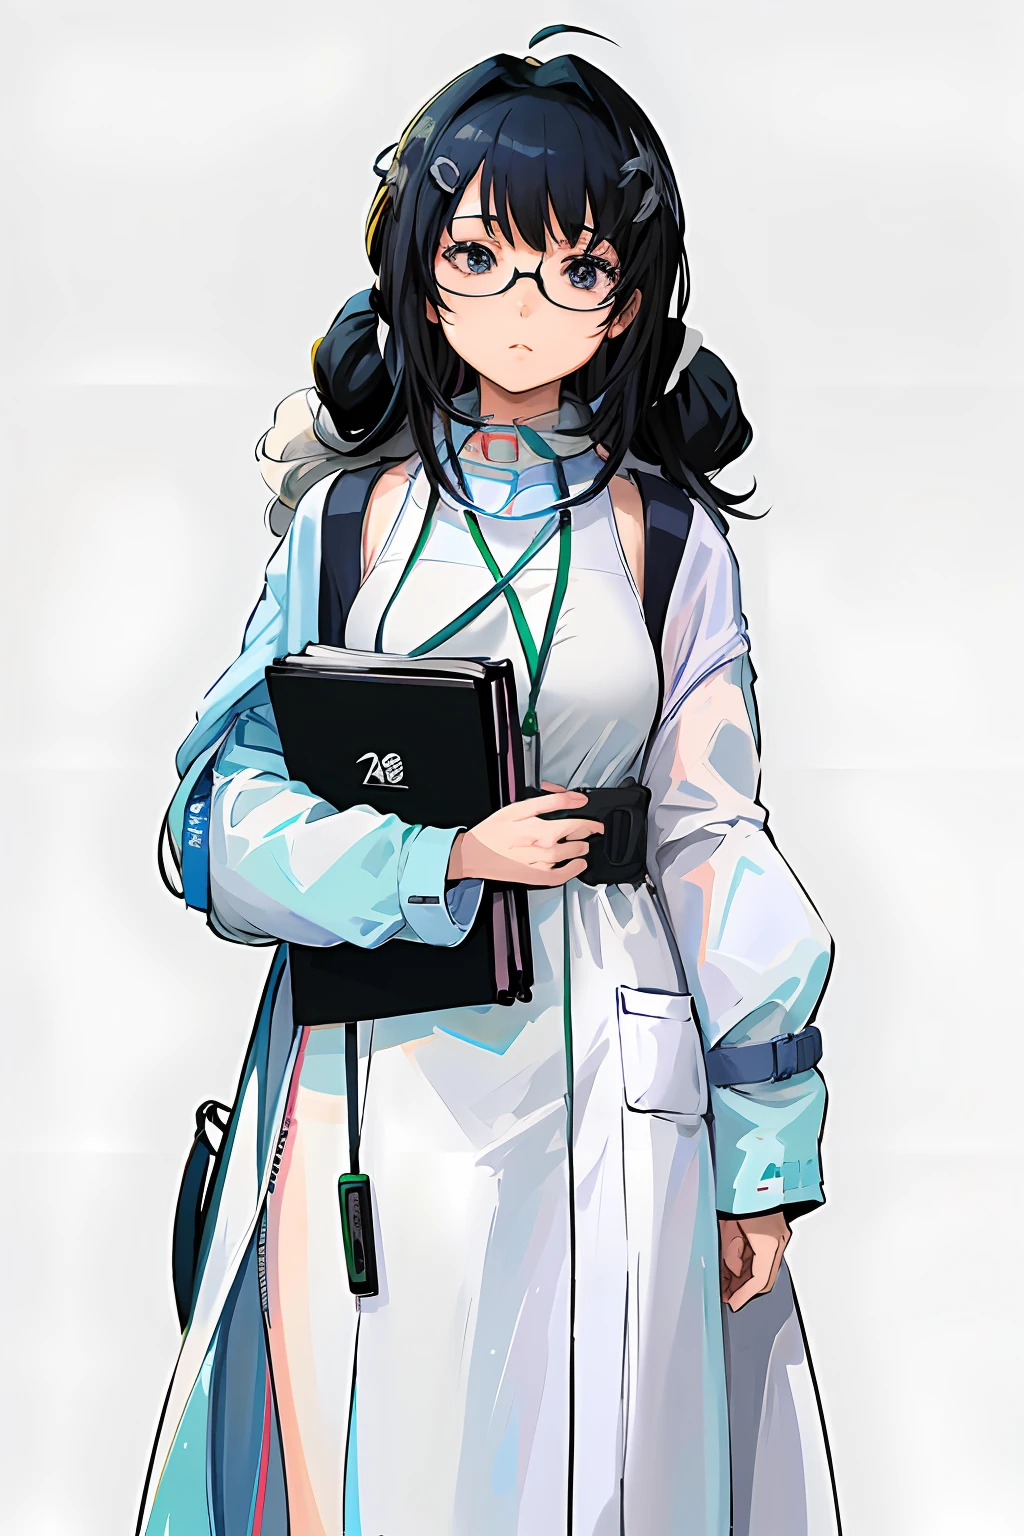 Anime characters with glasses and a book in their hands, anime moe art style, wearing lab coat and glasses,  Wear a lab coat and blue turtleneck，detailed anime character art, anime full body illustration, official character art, High Quality Anime Art Style, professor clothes, Anime character art, anime visual of a cute girl, On his right wrist he wears a blue watch